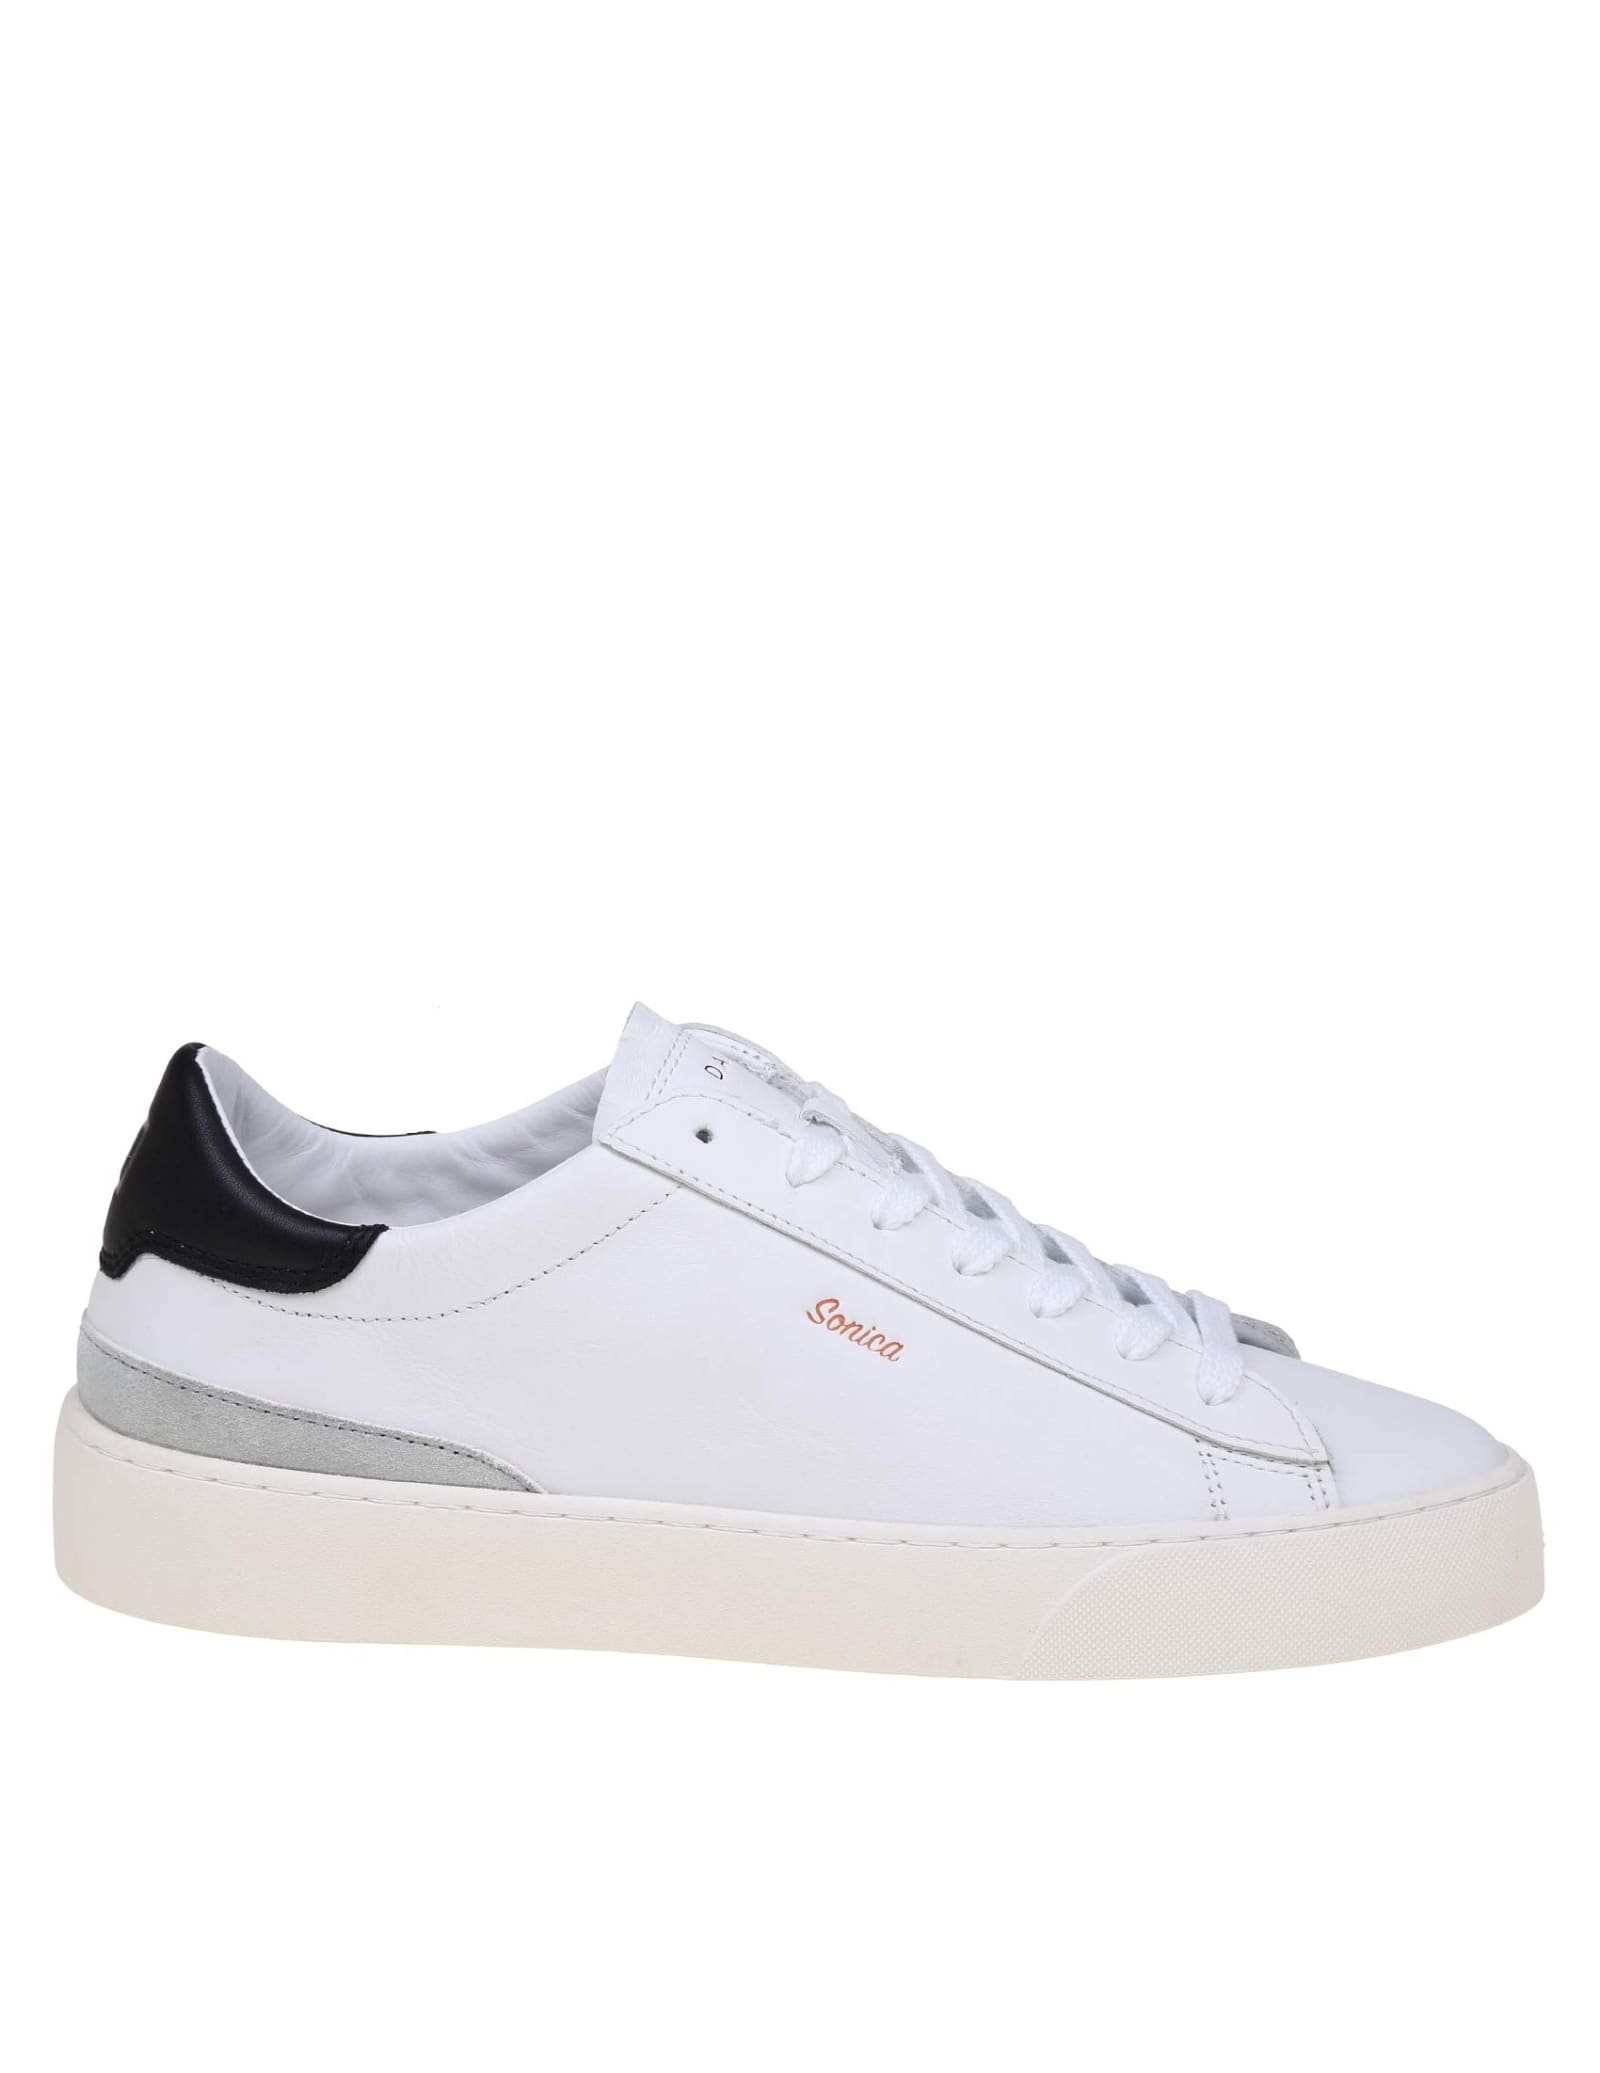 D. A.T. E. Sonica Sneakers In White/black Leather